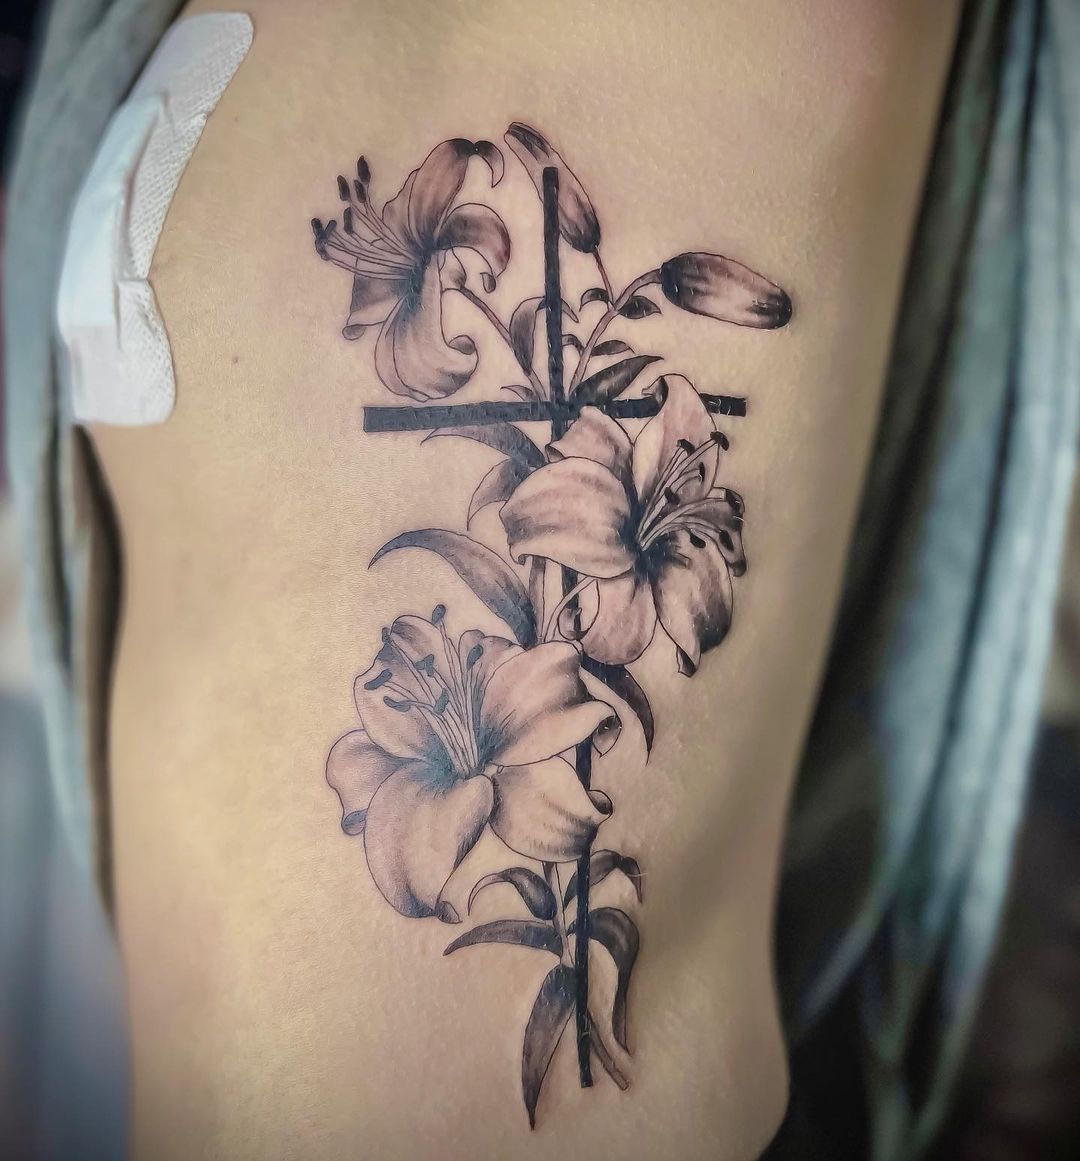 Lily and Cross Tattoo